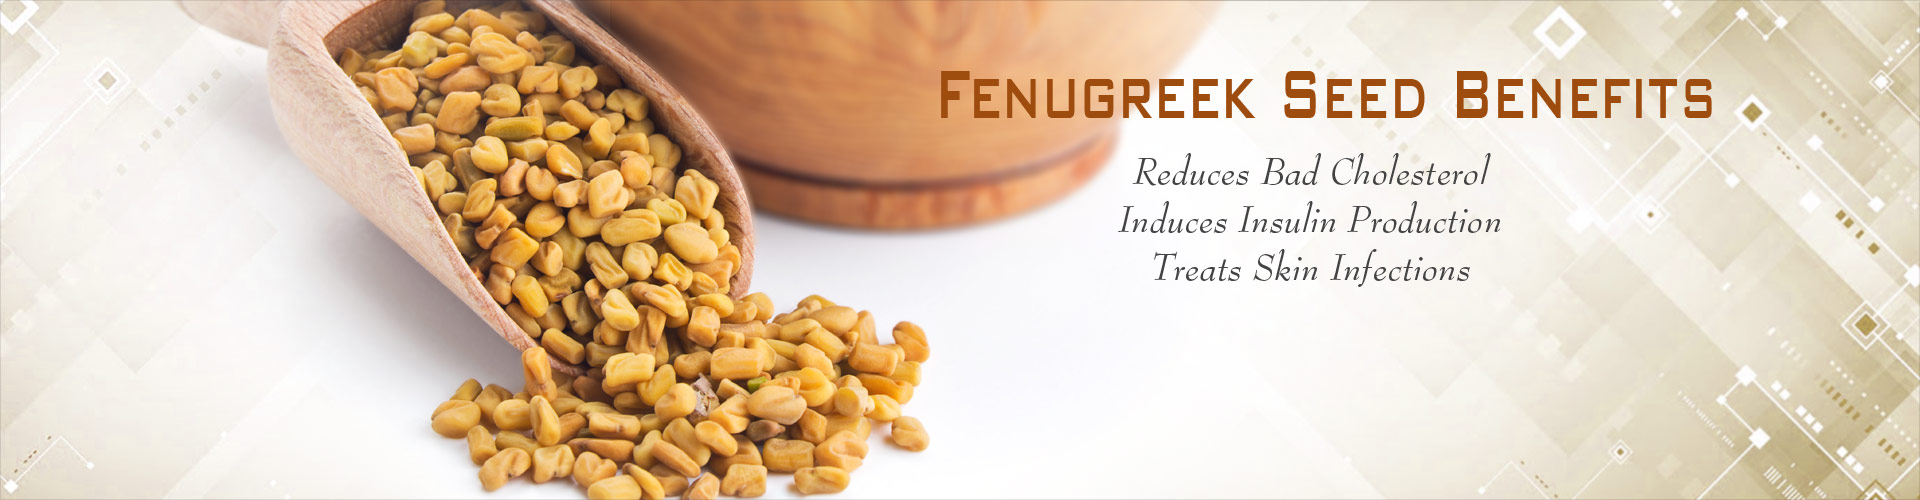 Fenugreek Seed Benefits - Reduces Bad Cholestrol, Induces Insulin Production, Treats Skin Infections
